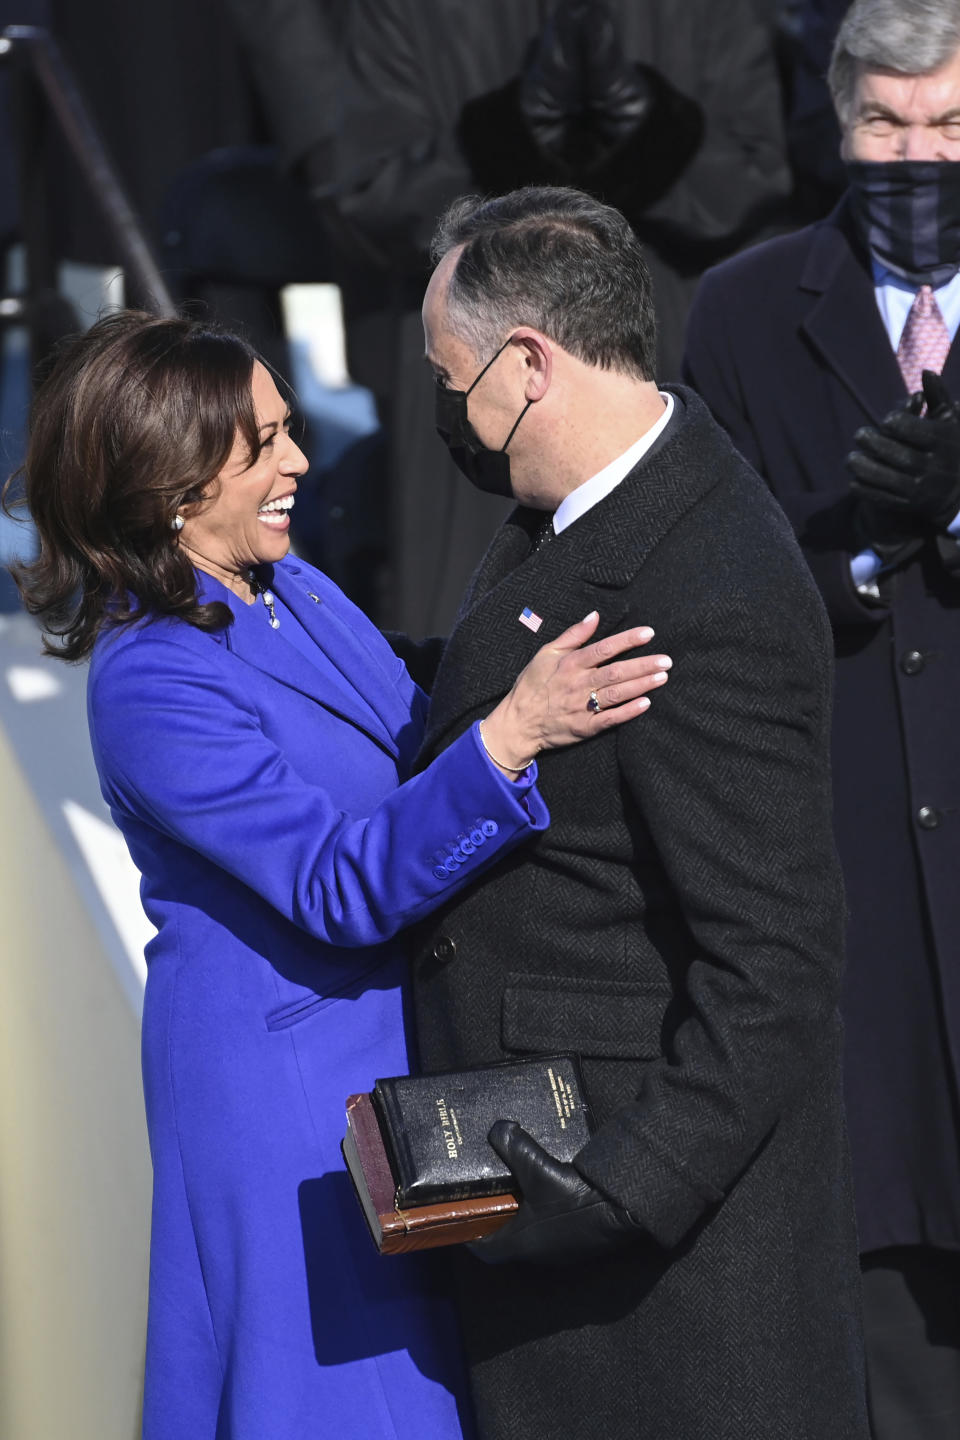 Vice President Kamala Harris is embraced by her husband Doug Emhoff after she was sworn into office during the 59th Presidential Inauguration at the U.S. Capitol in Washington, Wednesday, Jan. 20, 2021.(Saul Loeb/Pool Photo via AP)